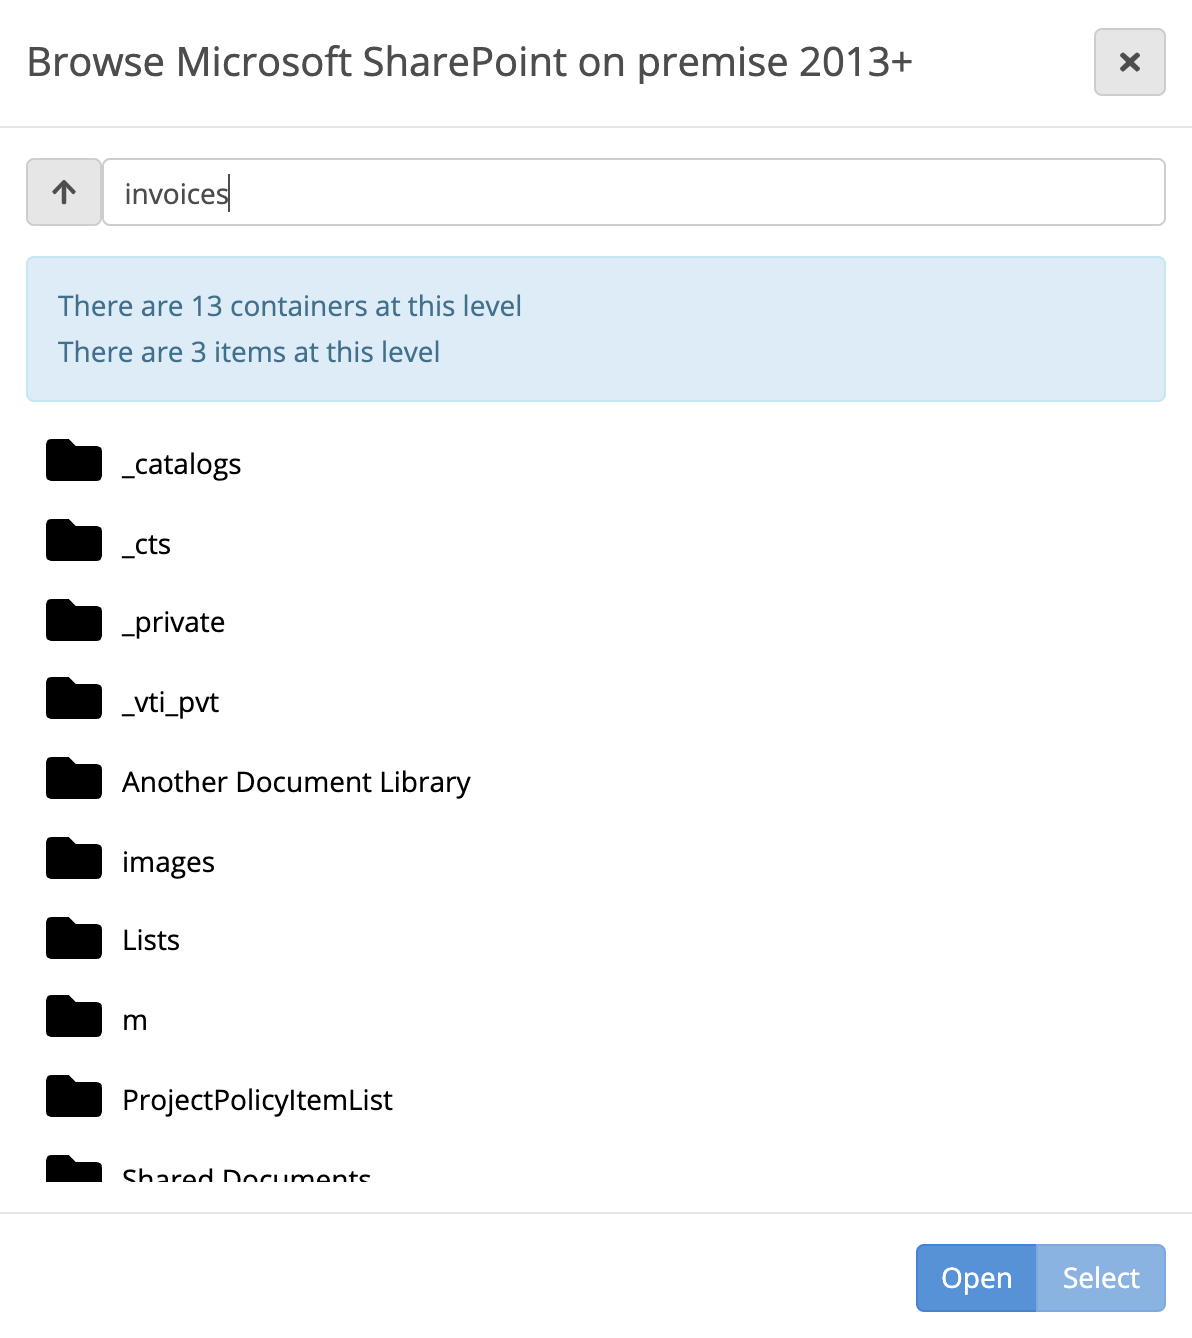 Browse to a SharePoint 2013+ folder